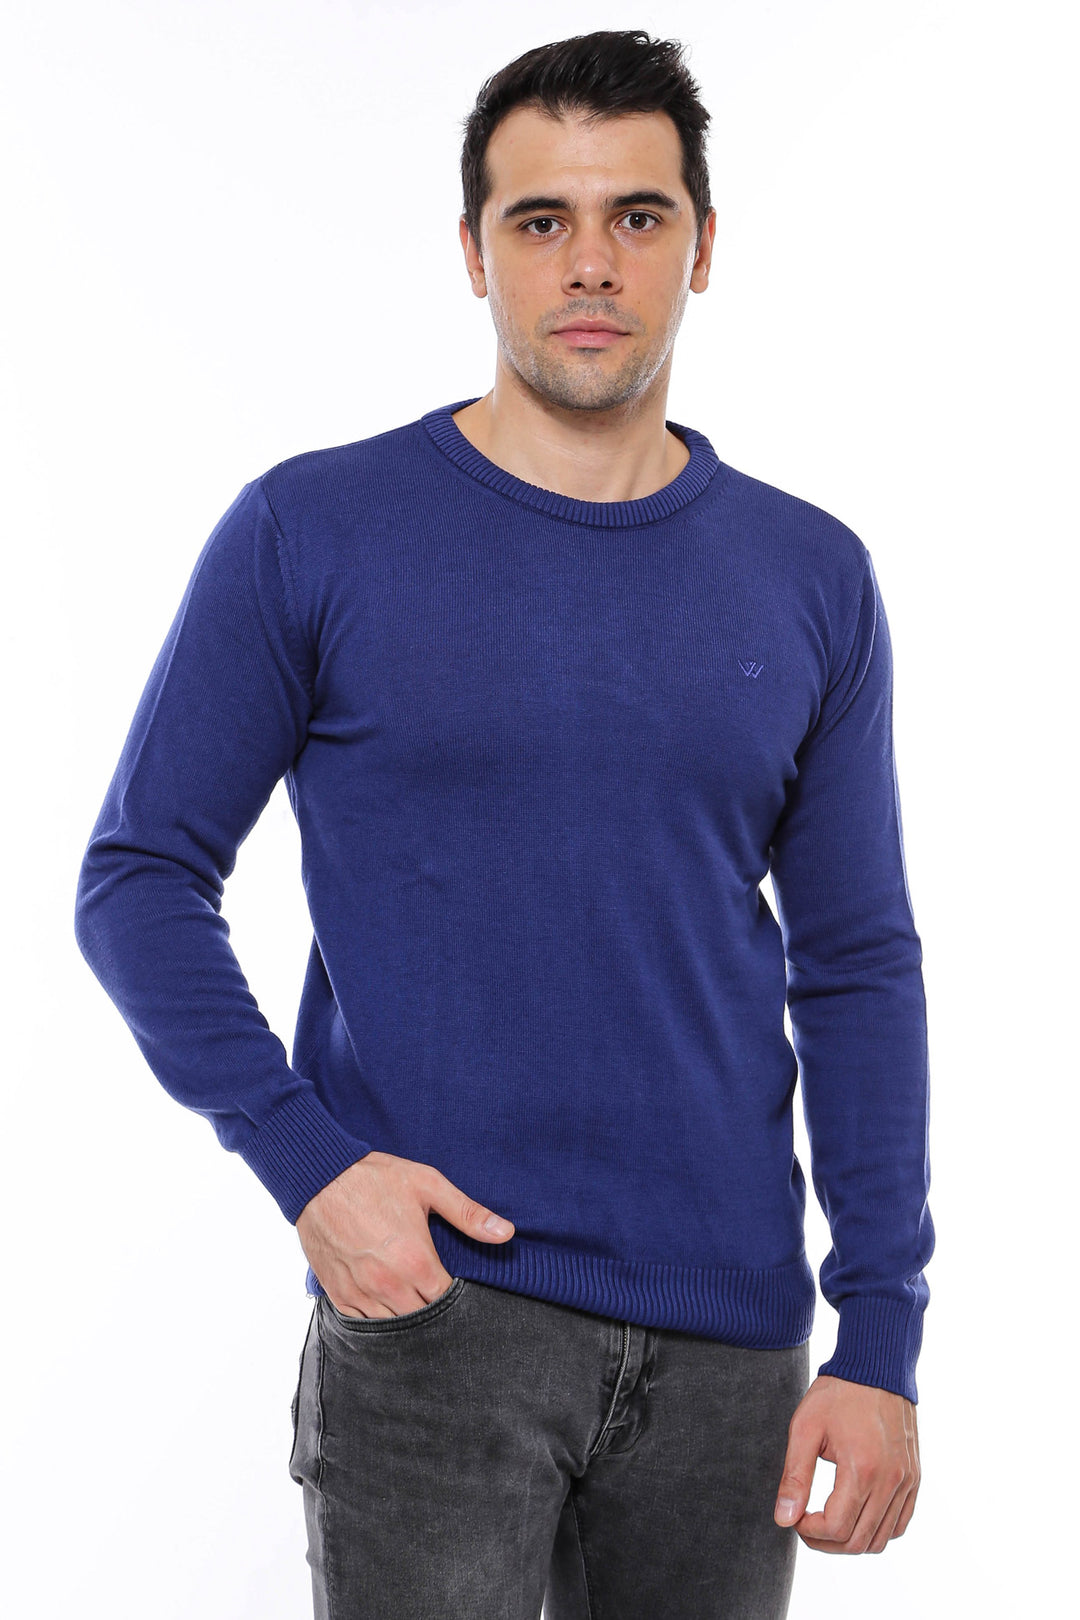 Navy Blue Crew Neck Embroidered Plain Knitwear - Wessi